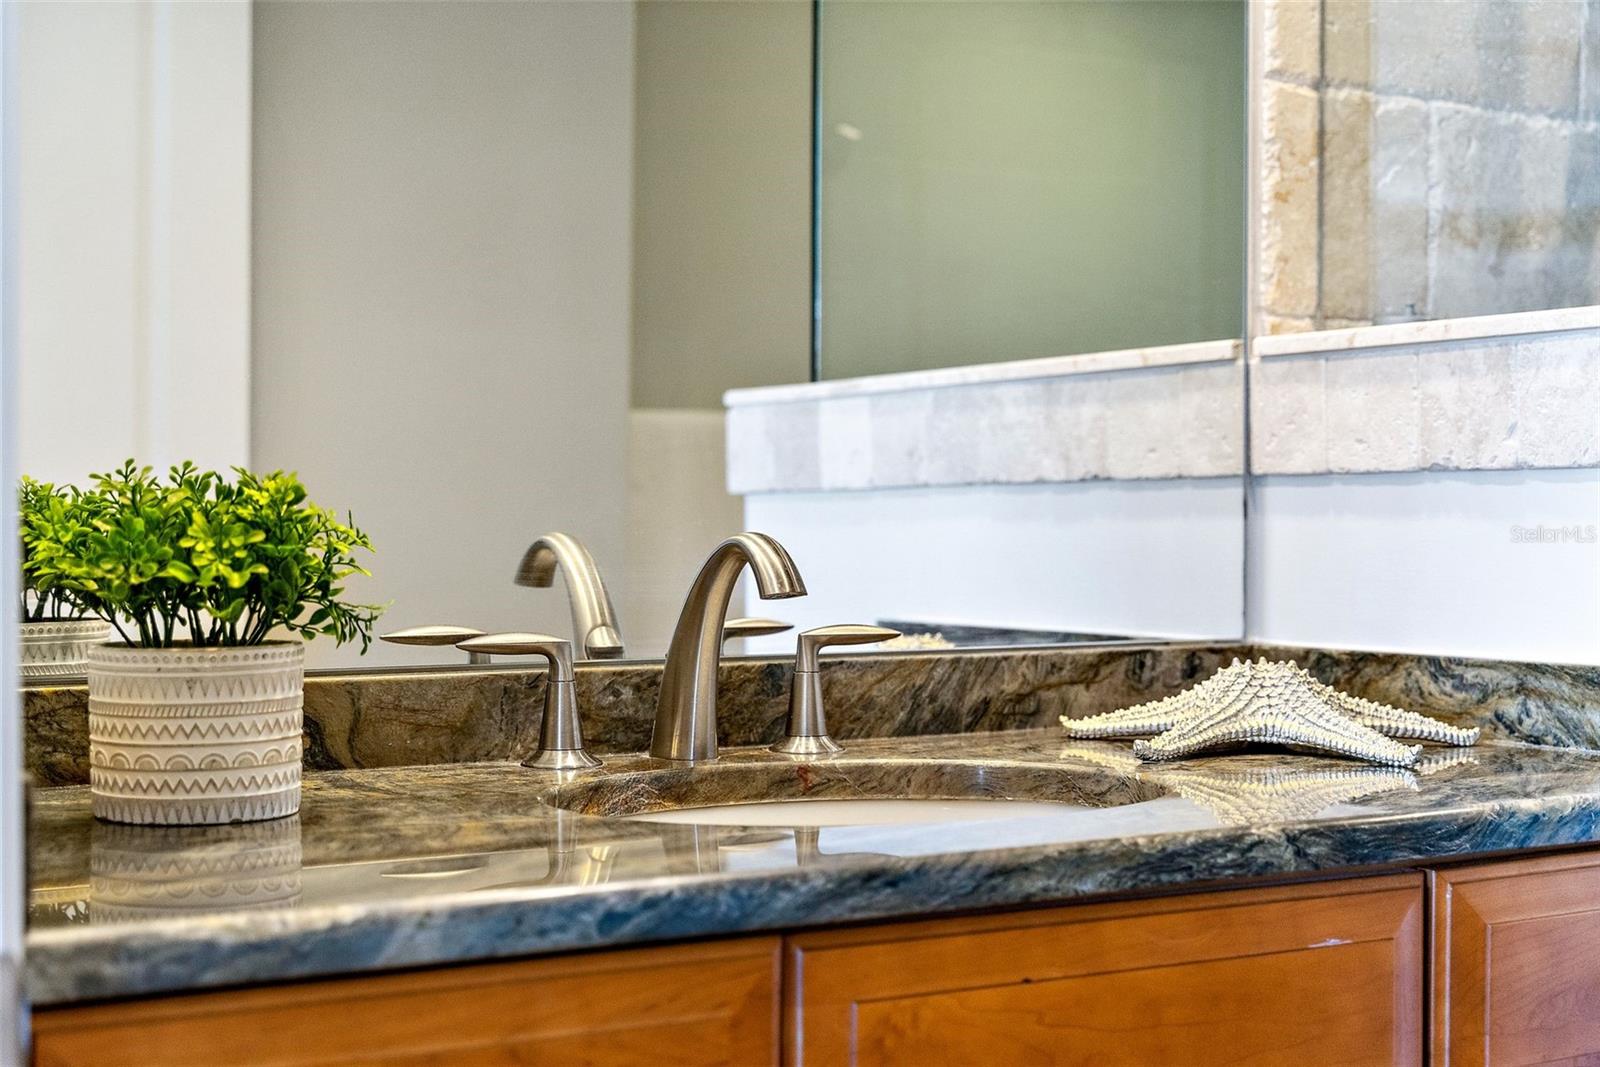 The 8" widespread faucet in a brushed finish and undermount sink are comfortable to use and stylish.